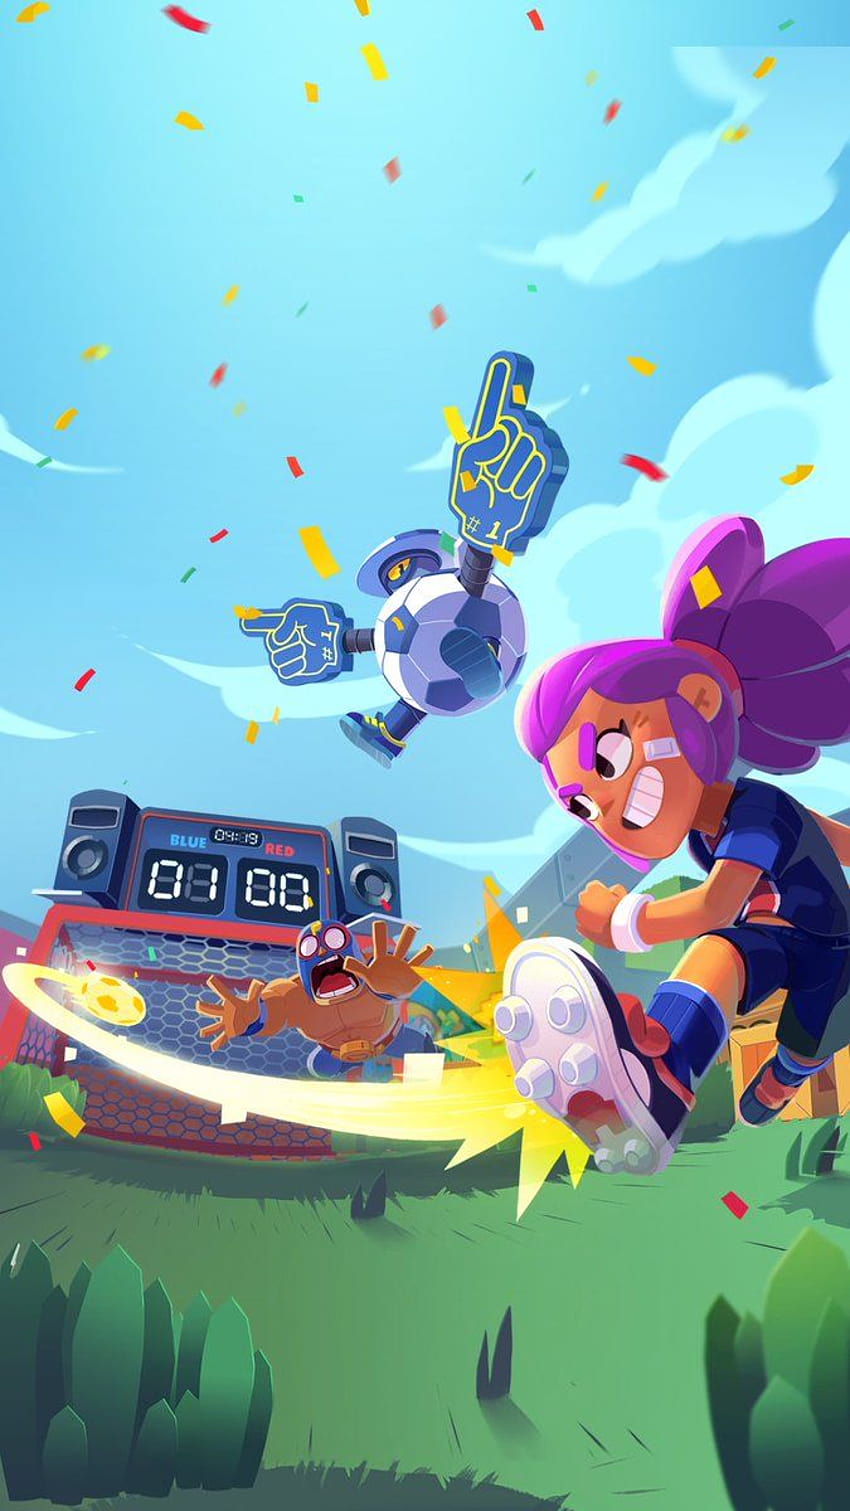 Shelly: Fighter – The Weekly Brawler